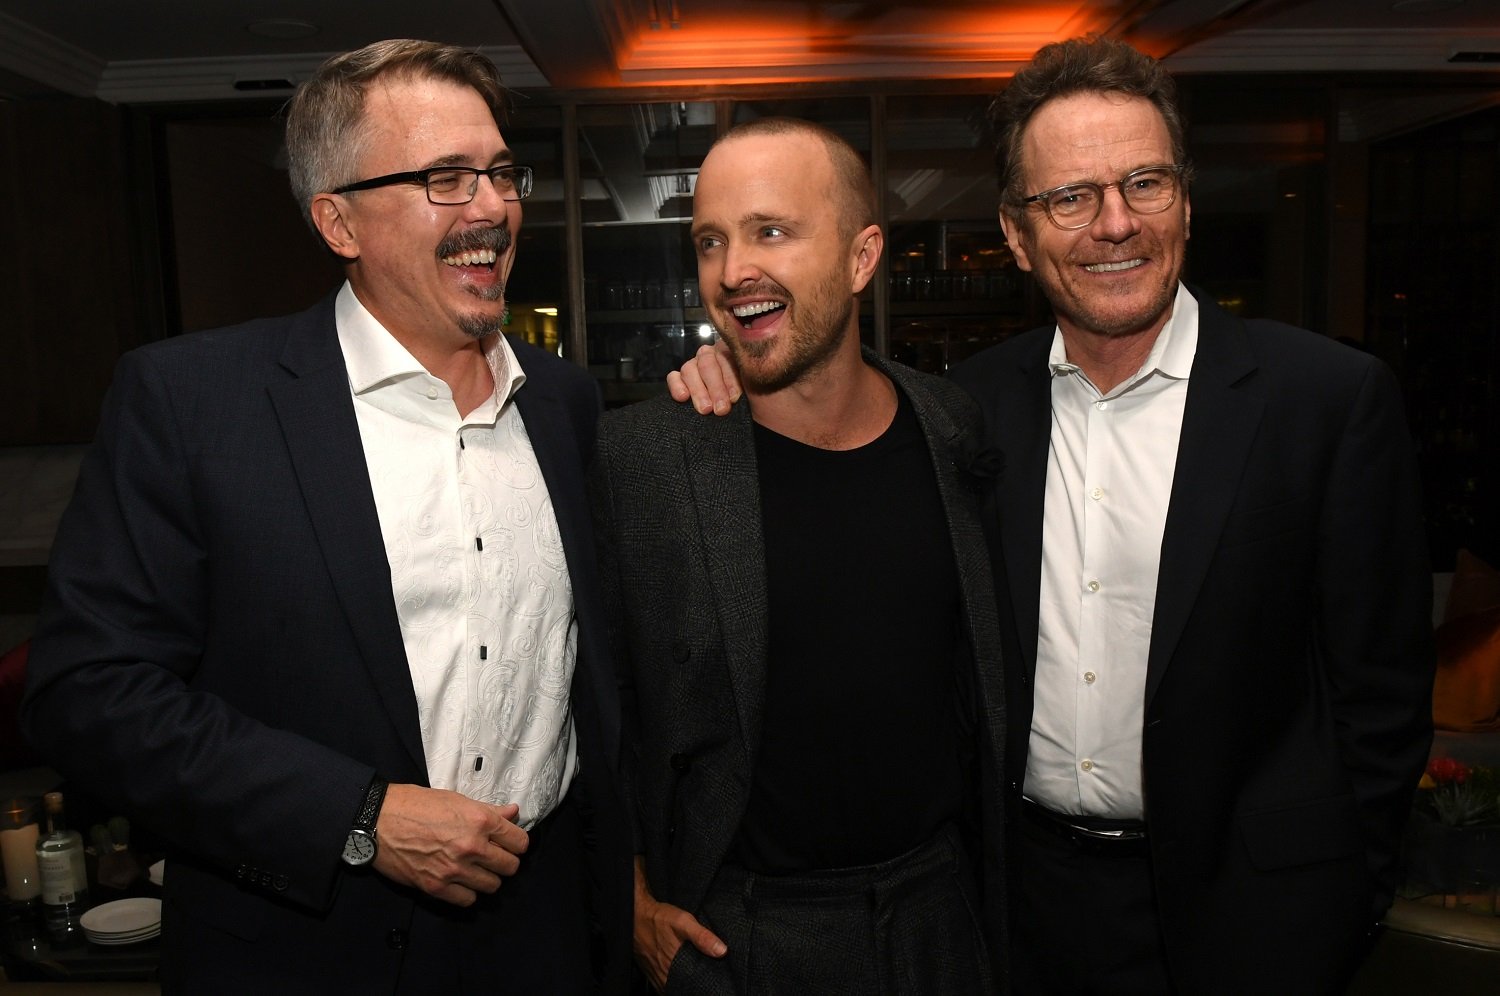 Vince Gilligan, Aaron Paul, and Bryan Cranston of Breaking Bad -- Vince Gilligan's mother hated the Breaking Bad finale